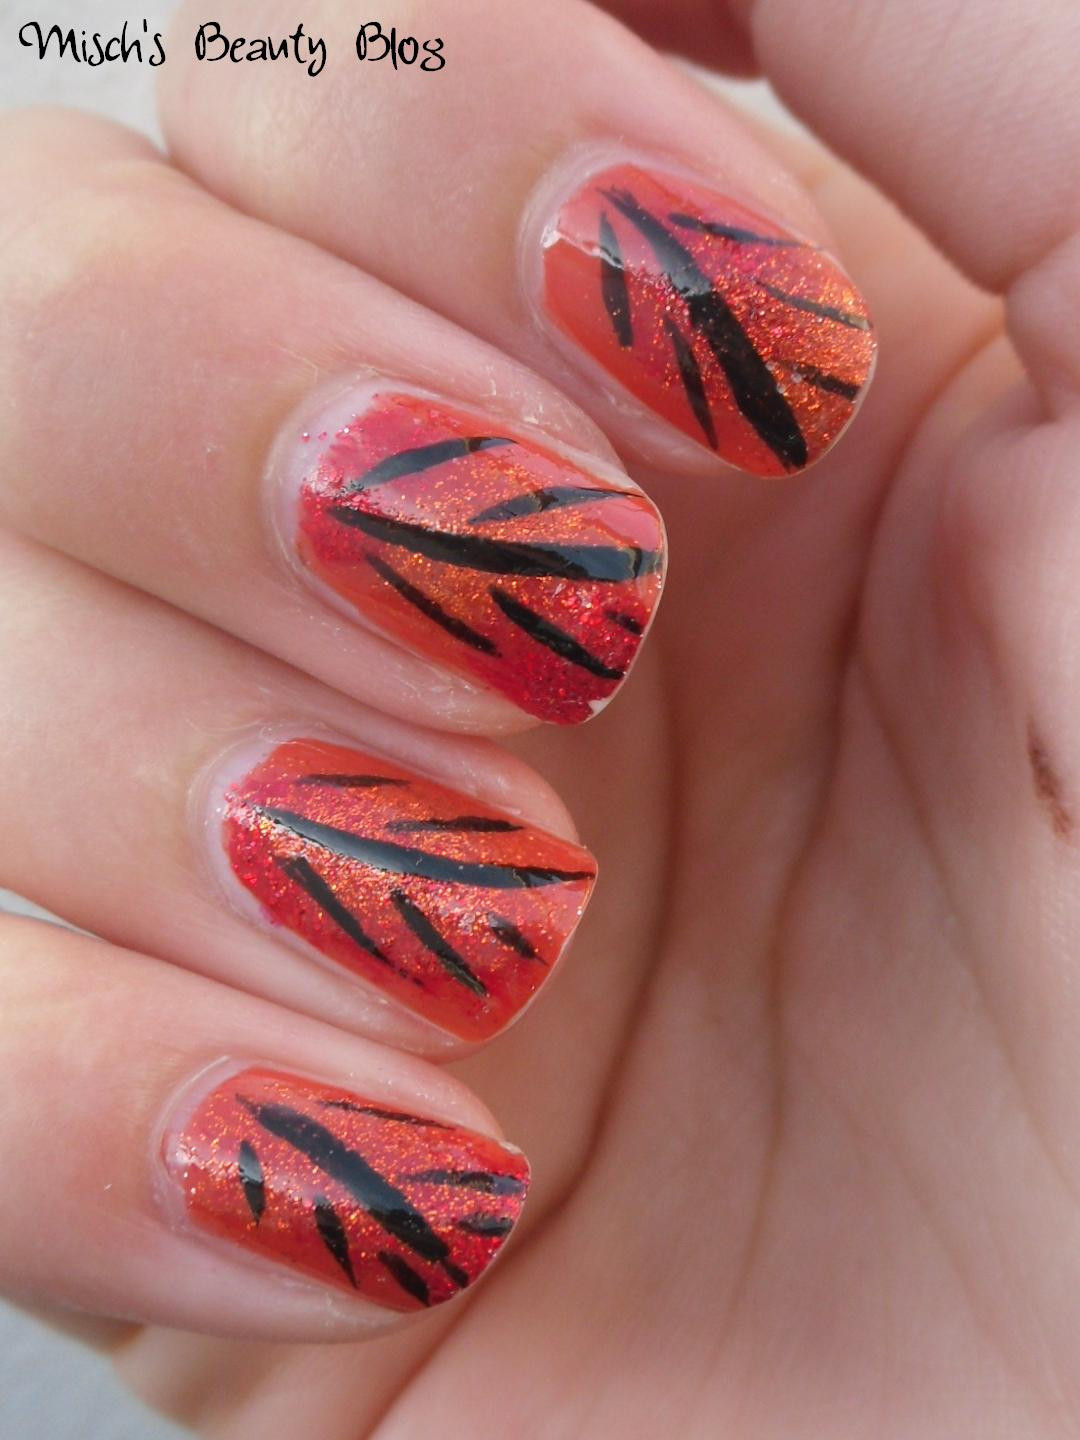 Fall Color Nail Designs
 Misch s Beauty Blog NOTD September 29th Fall Leaf Nail Art